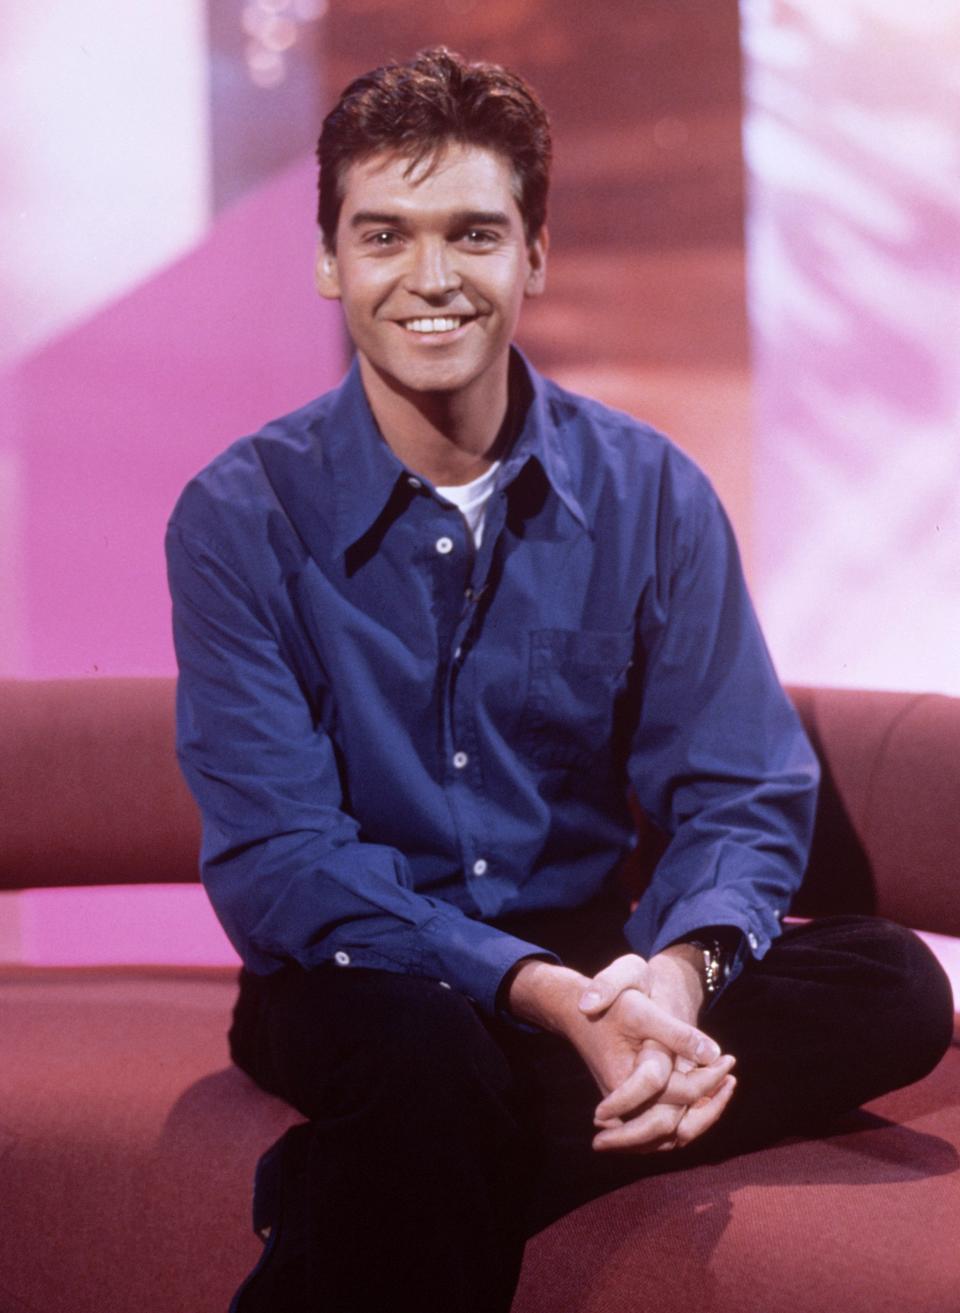 Phillip Schofield in the 1980s. The presenter has been a fixture on entertainment shows for four decades. (Rex)